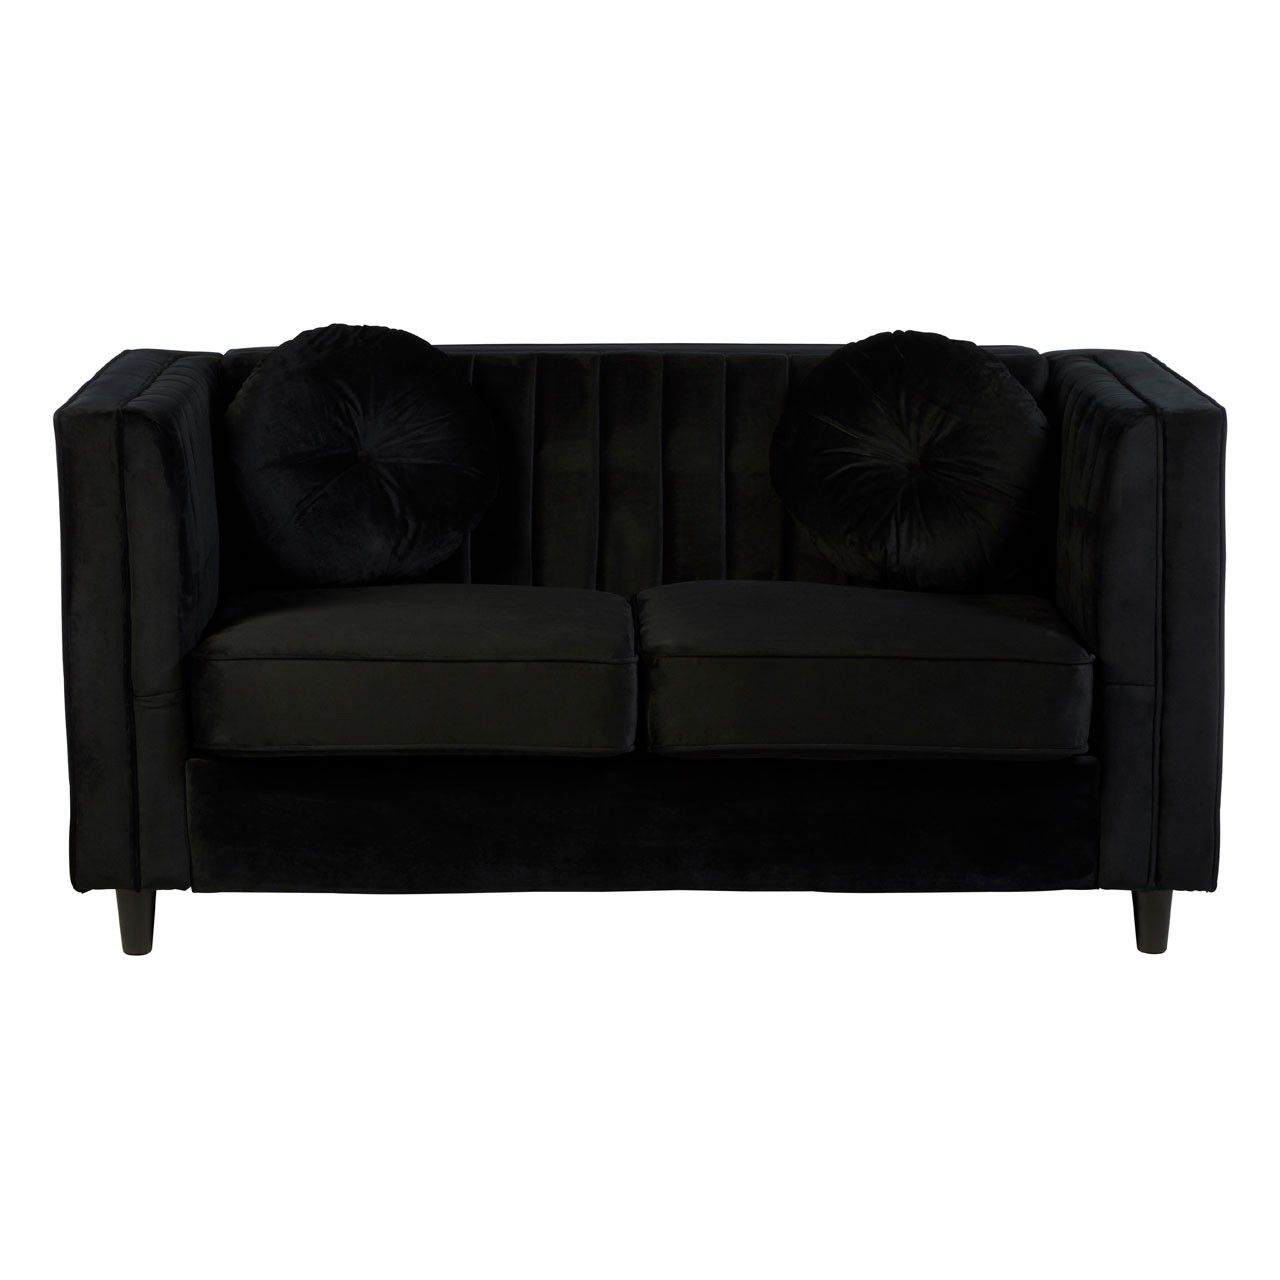 Featured Photo of 15 Best Collection of Black Velvet 2-seater Sofa Beds